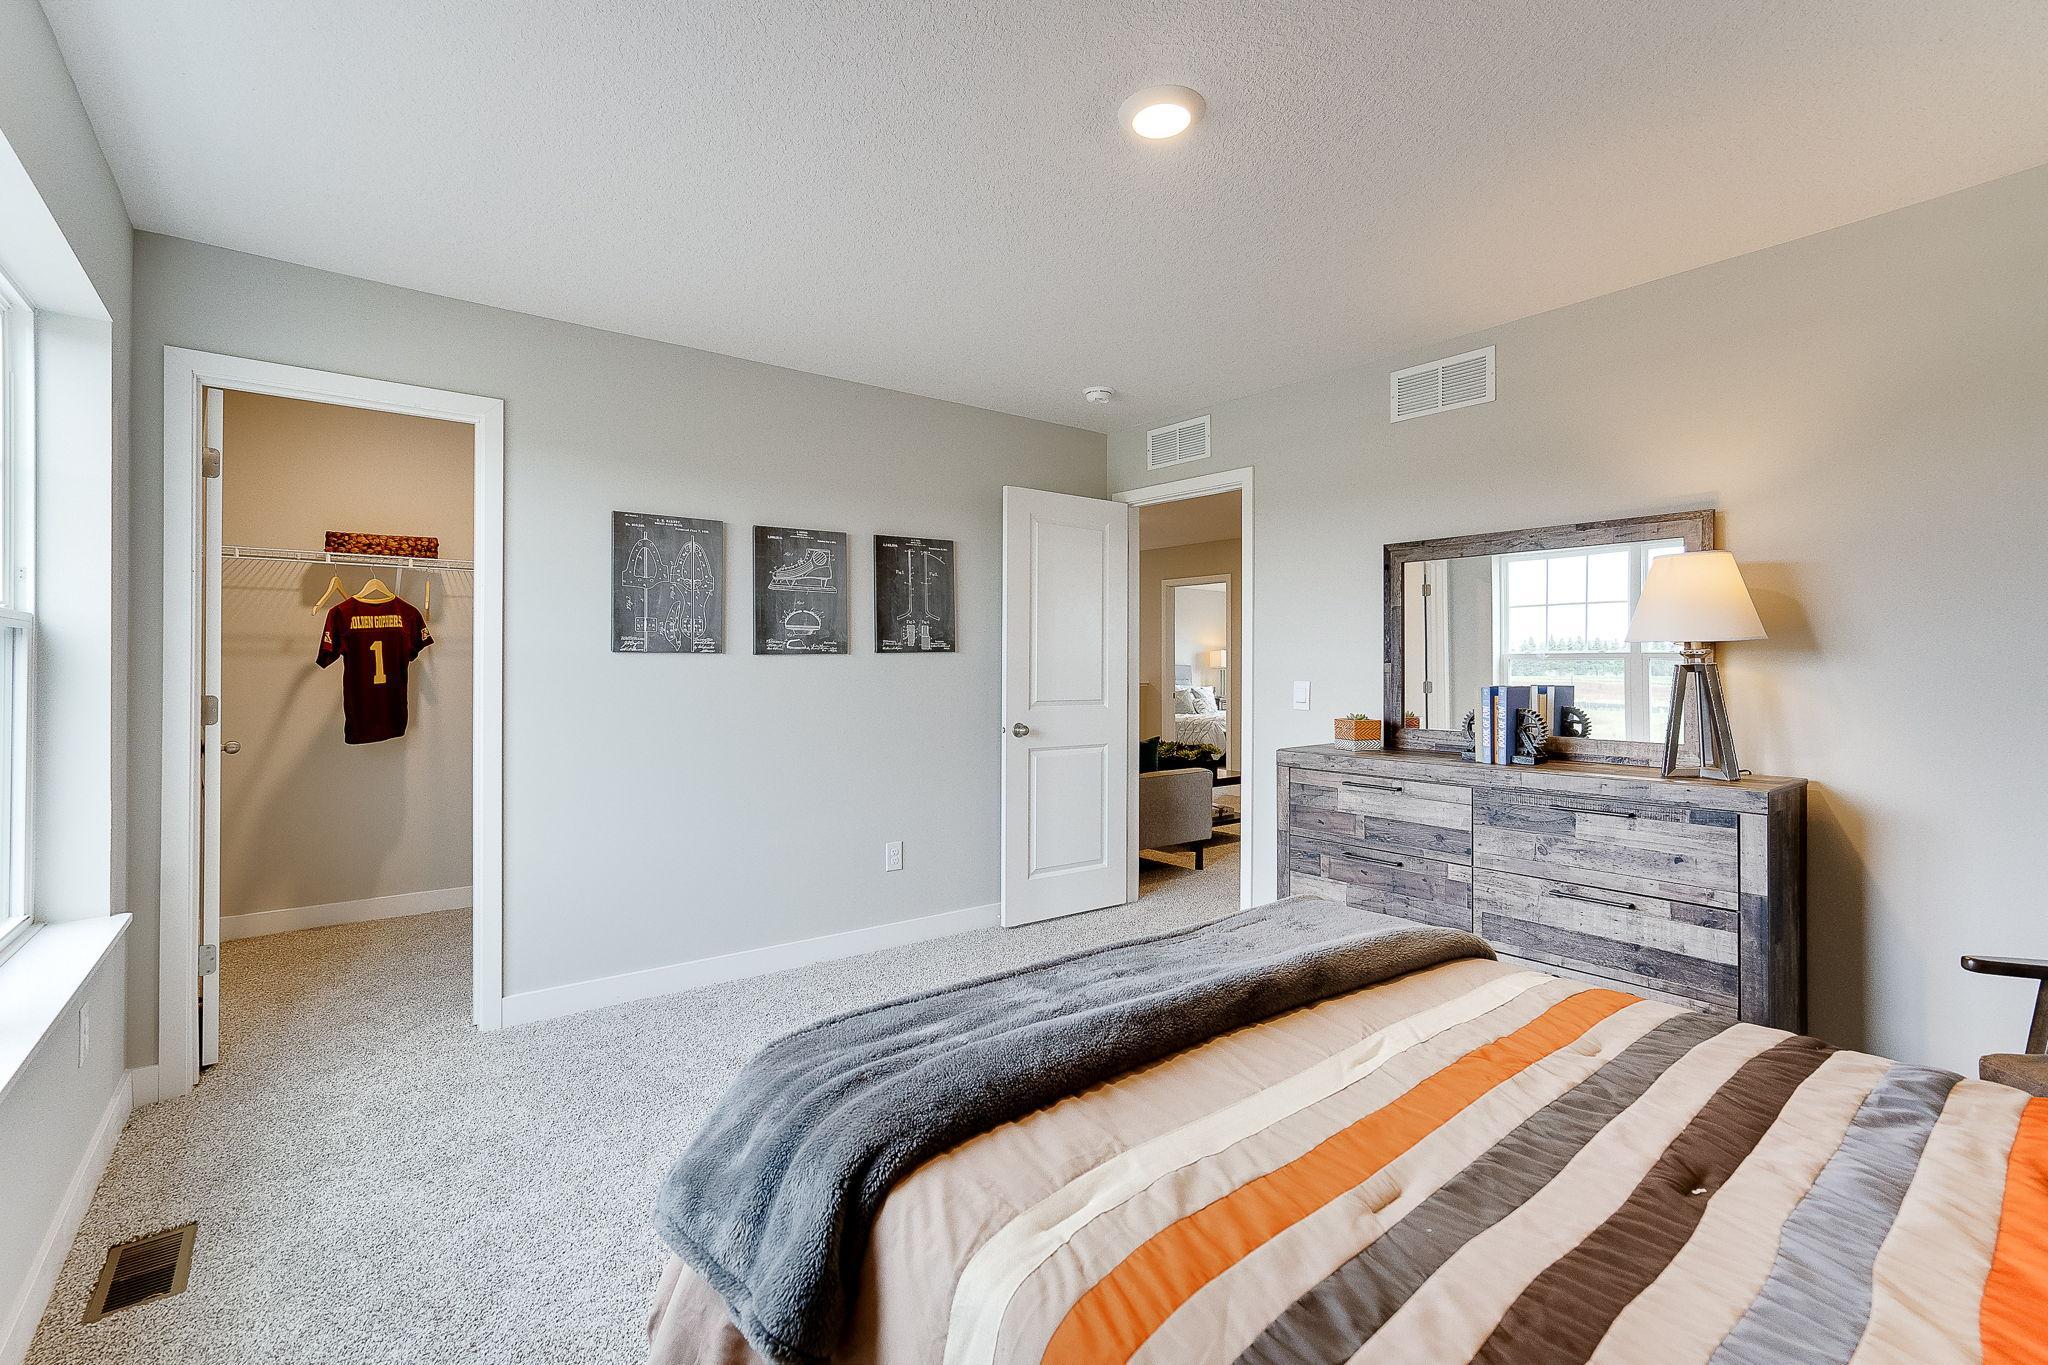 Another one of the secondary bedrooms with walk-in closet! (Model home, colors will vary)